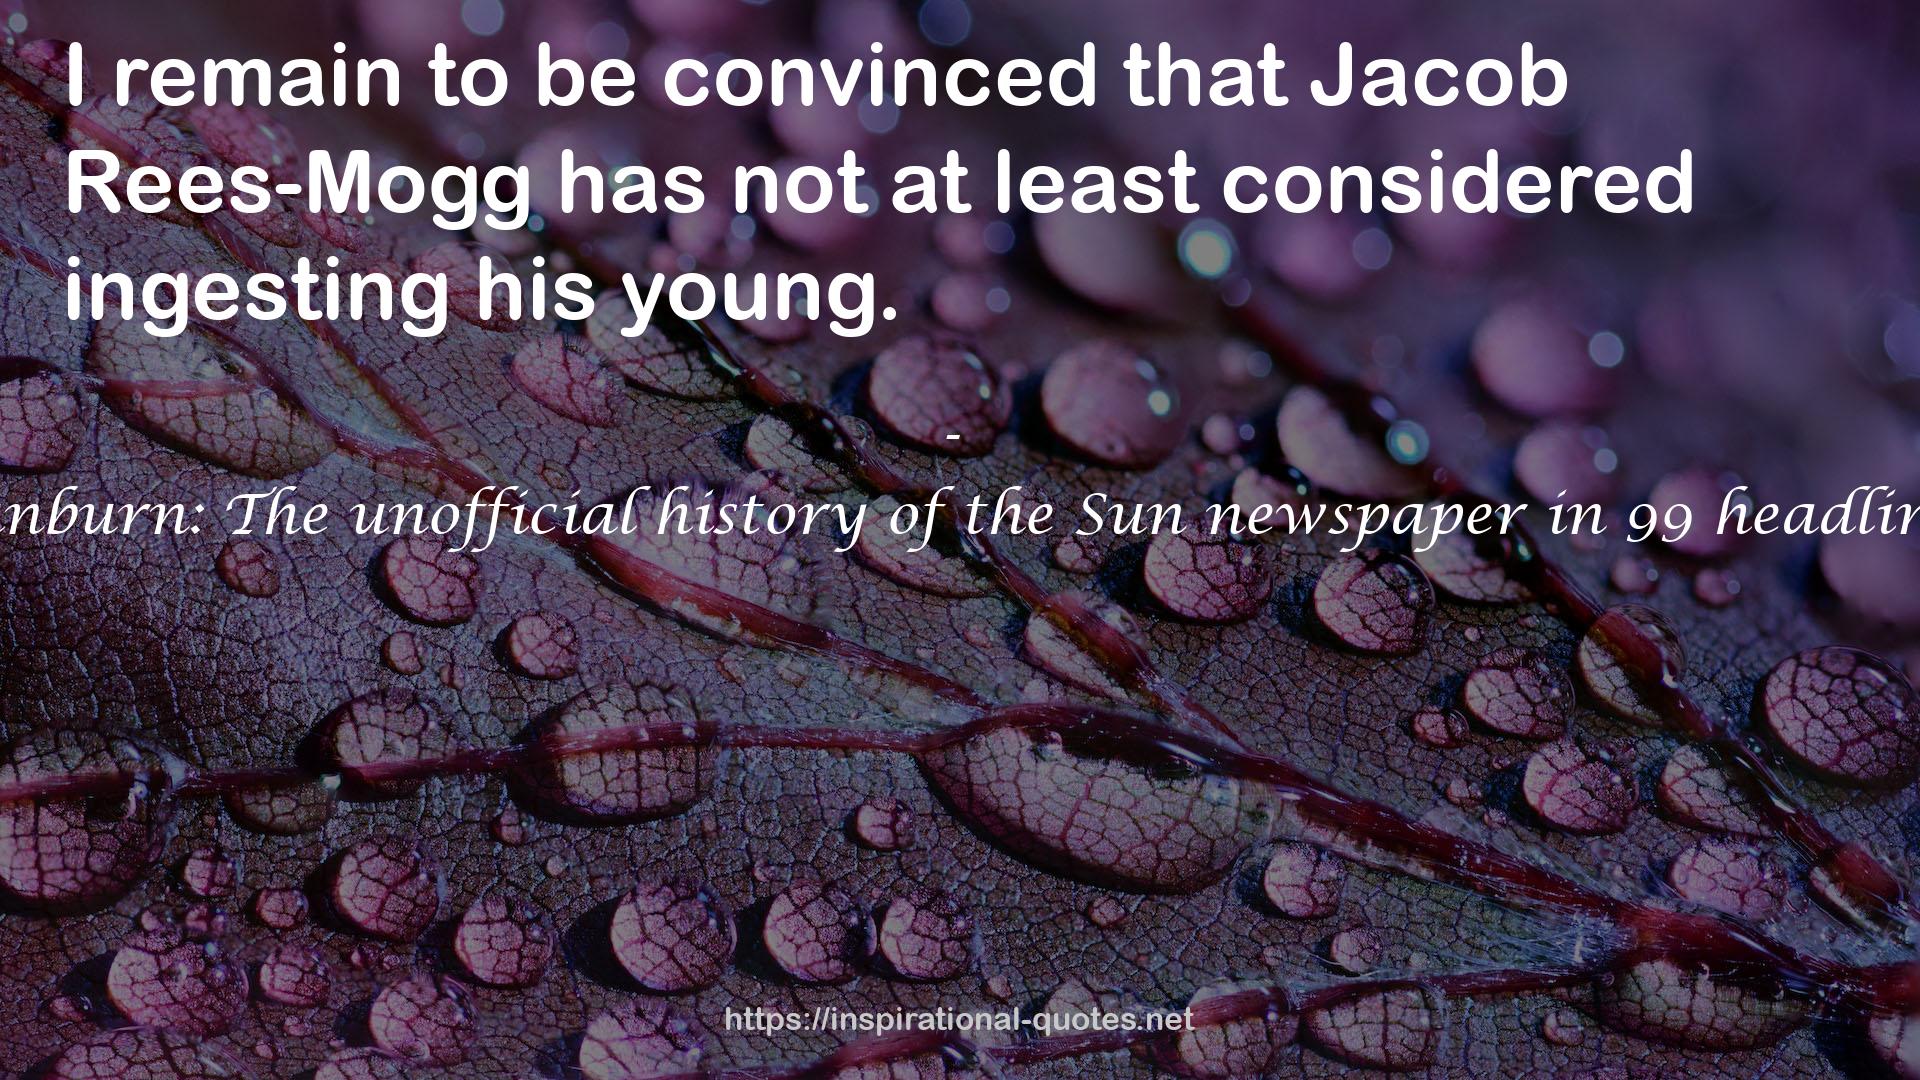 Sunburn: The unofficial history of the Sun newspaper in 99 headlines QUOTES